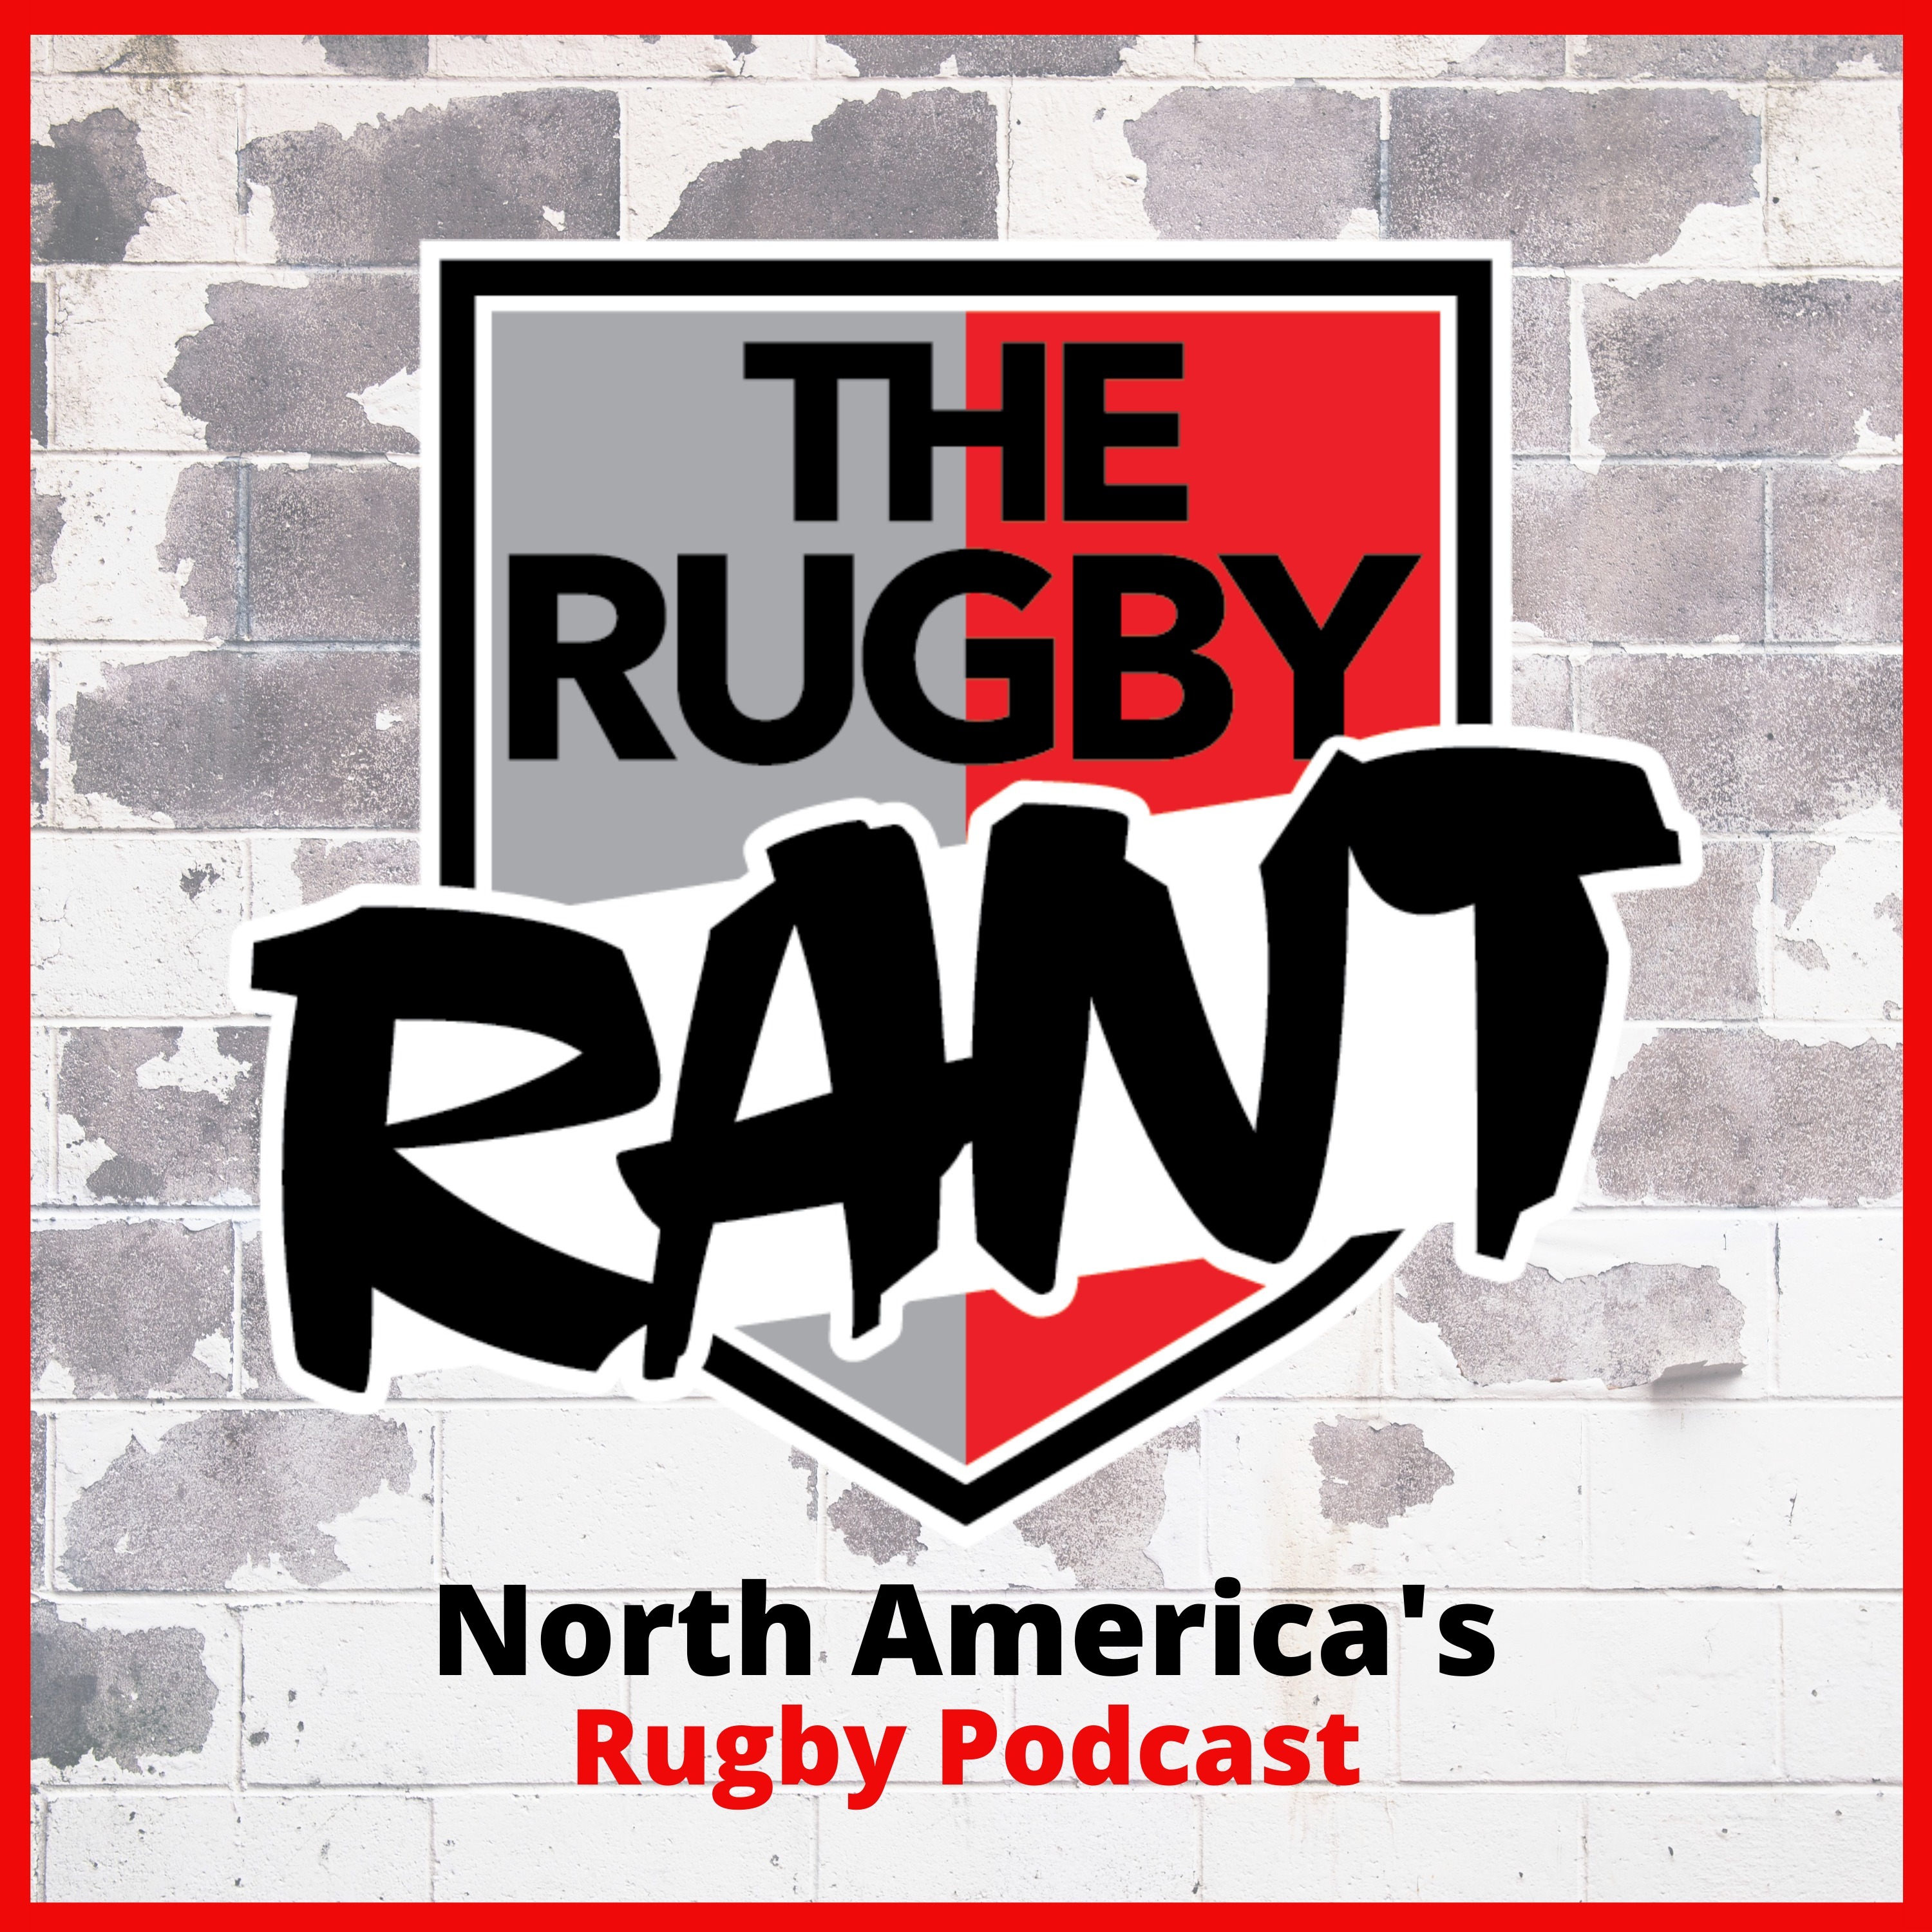 The Rugby Rant - Run, Pass or Kick with Jamie Cudmore & David Fee